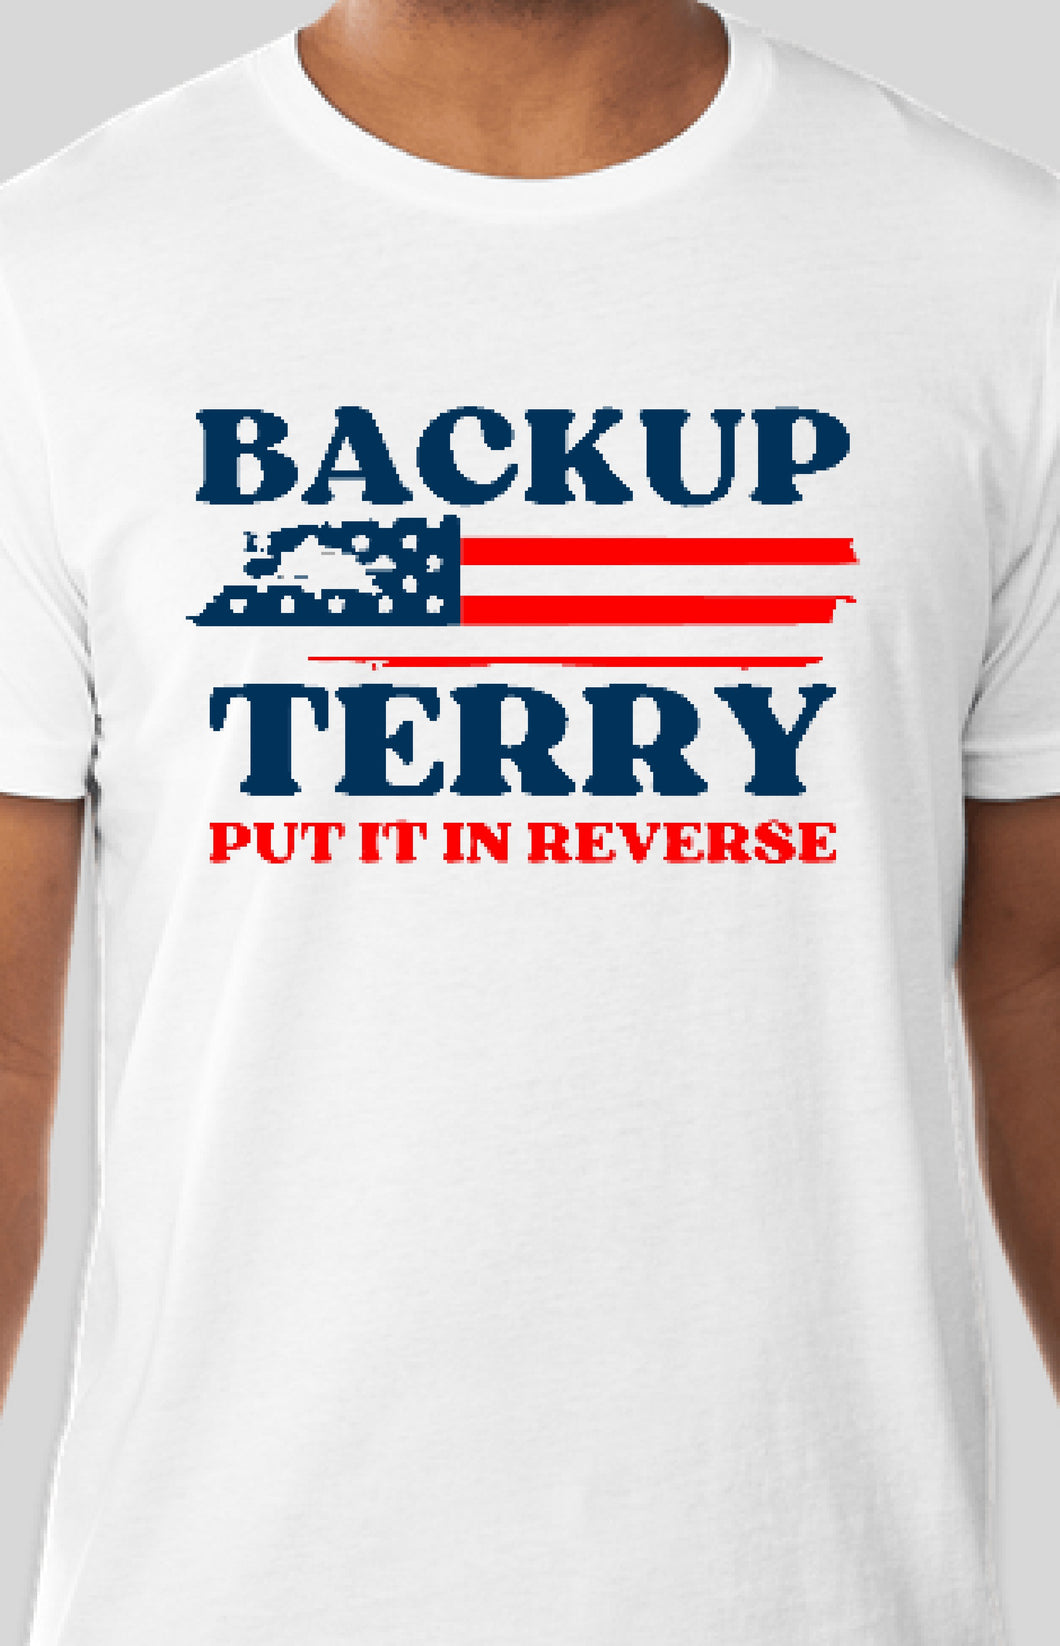 Backup Terry!